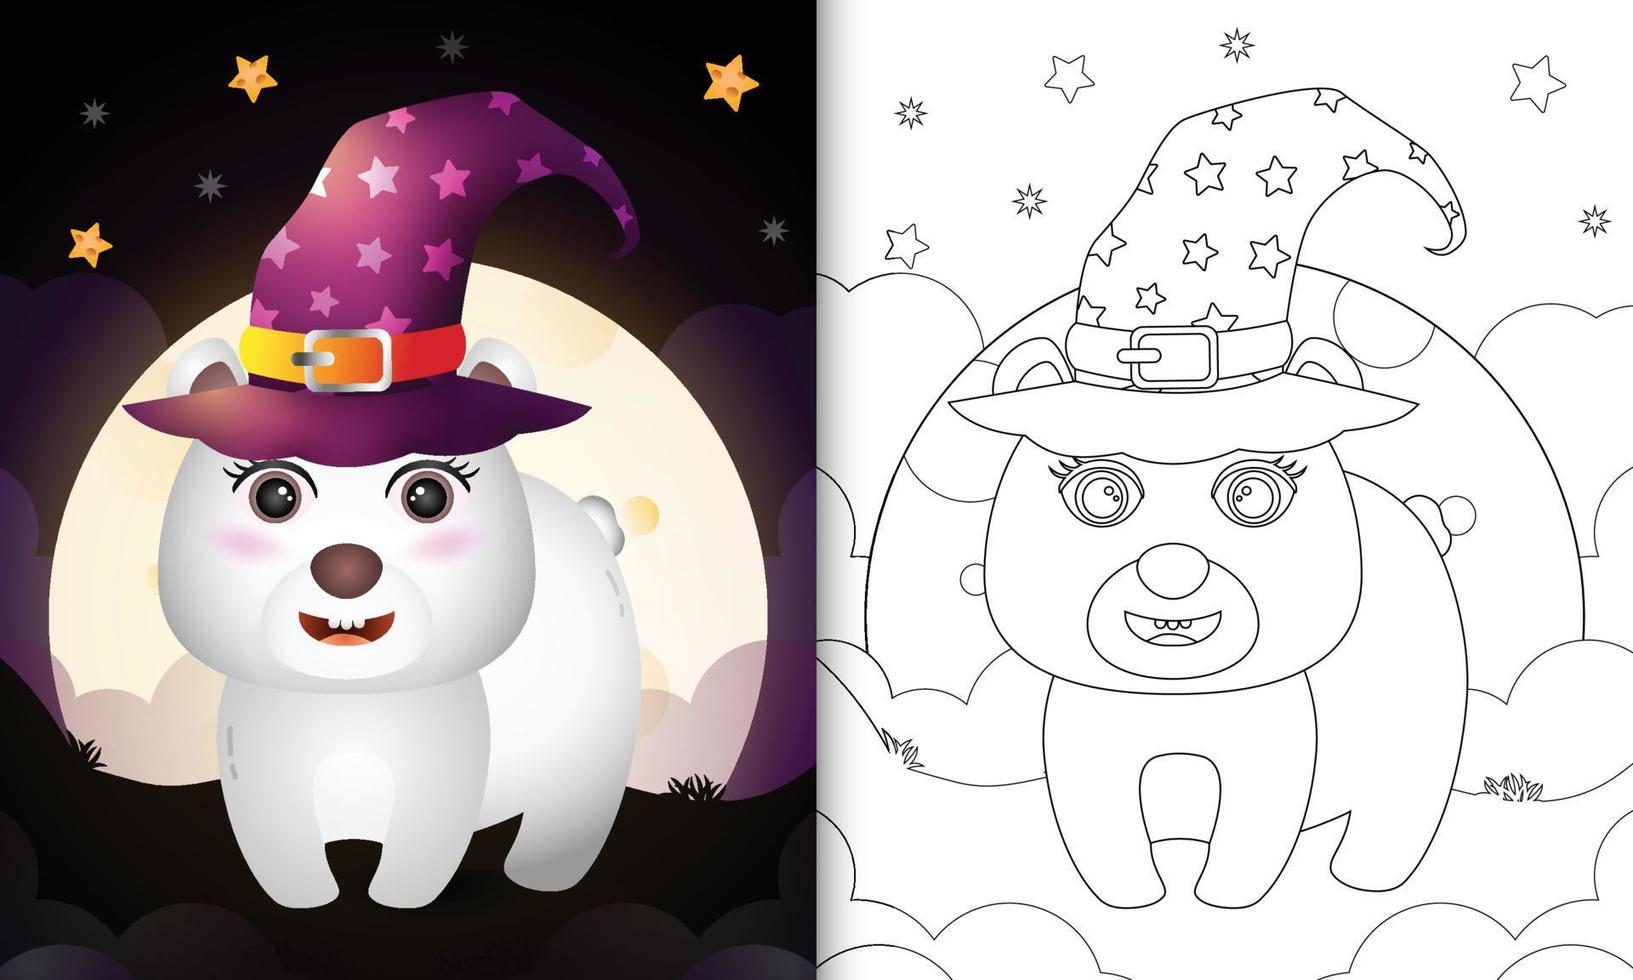 coloring book with a cute cartoon halloween witch polar bear front the moon vector